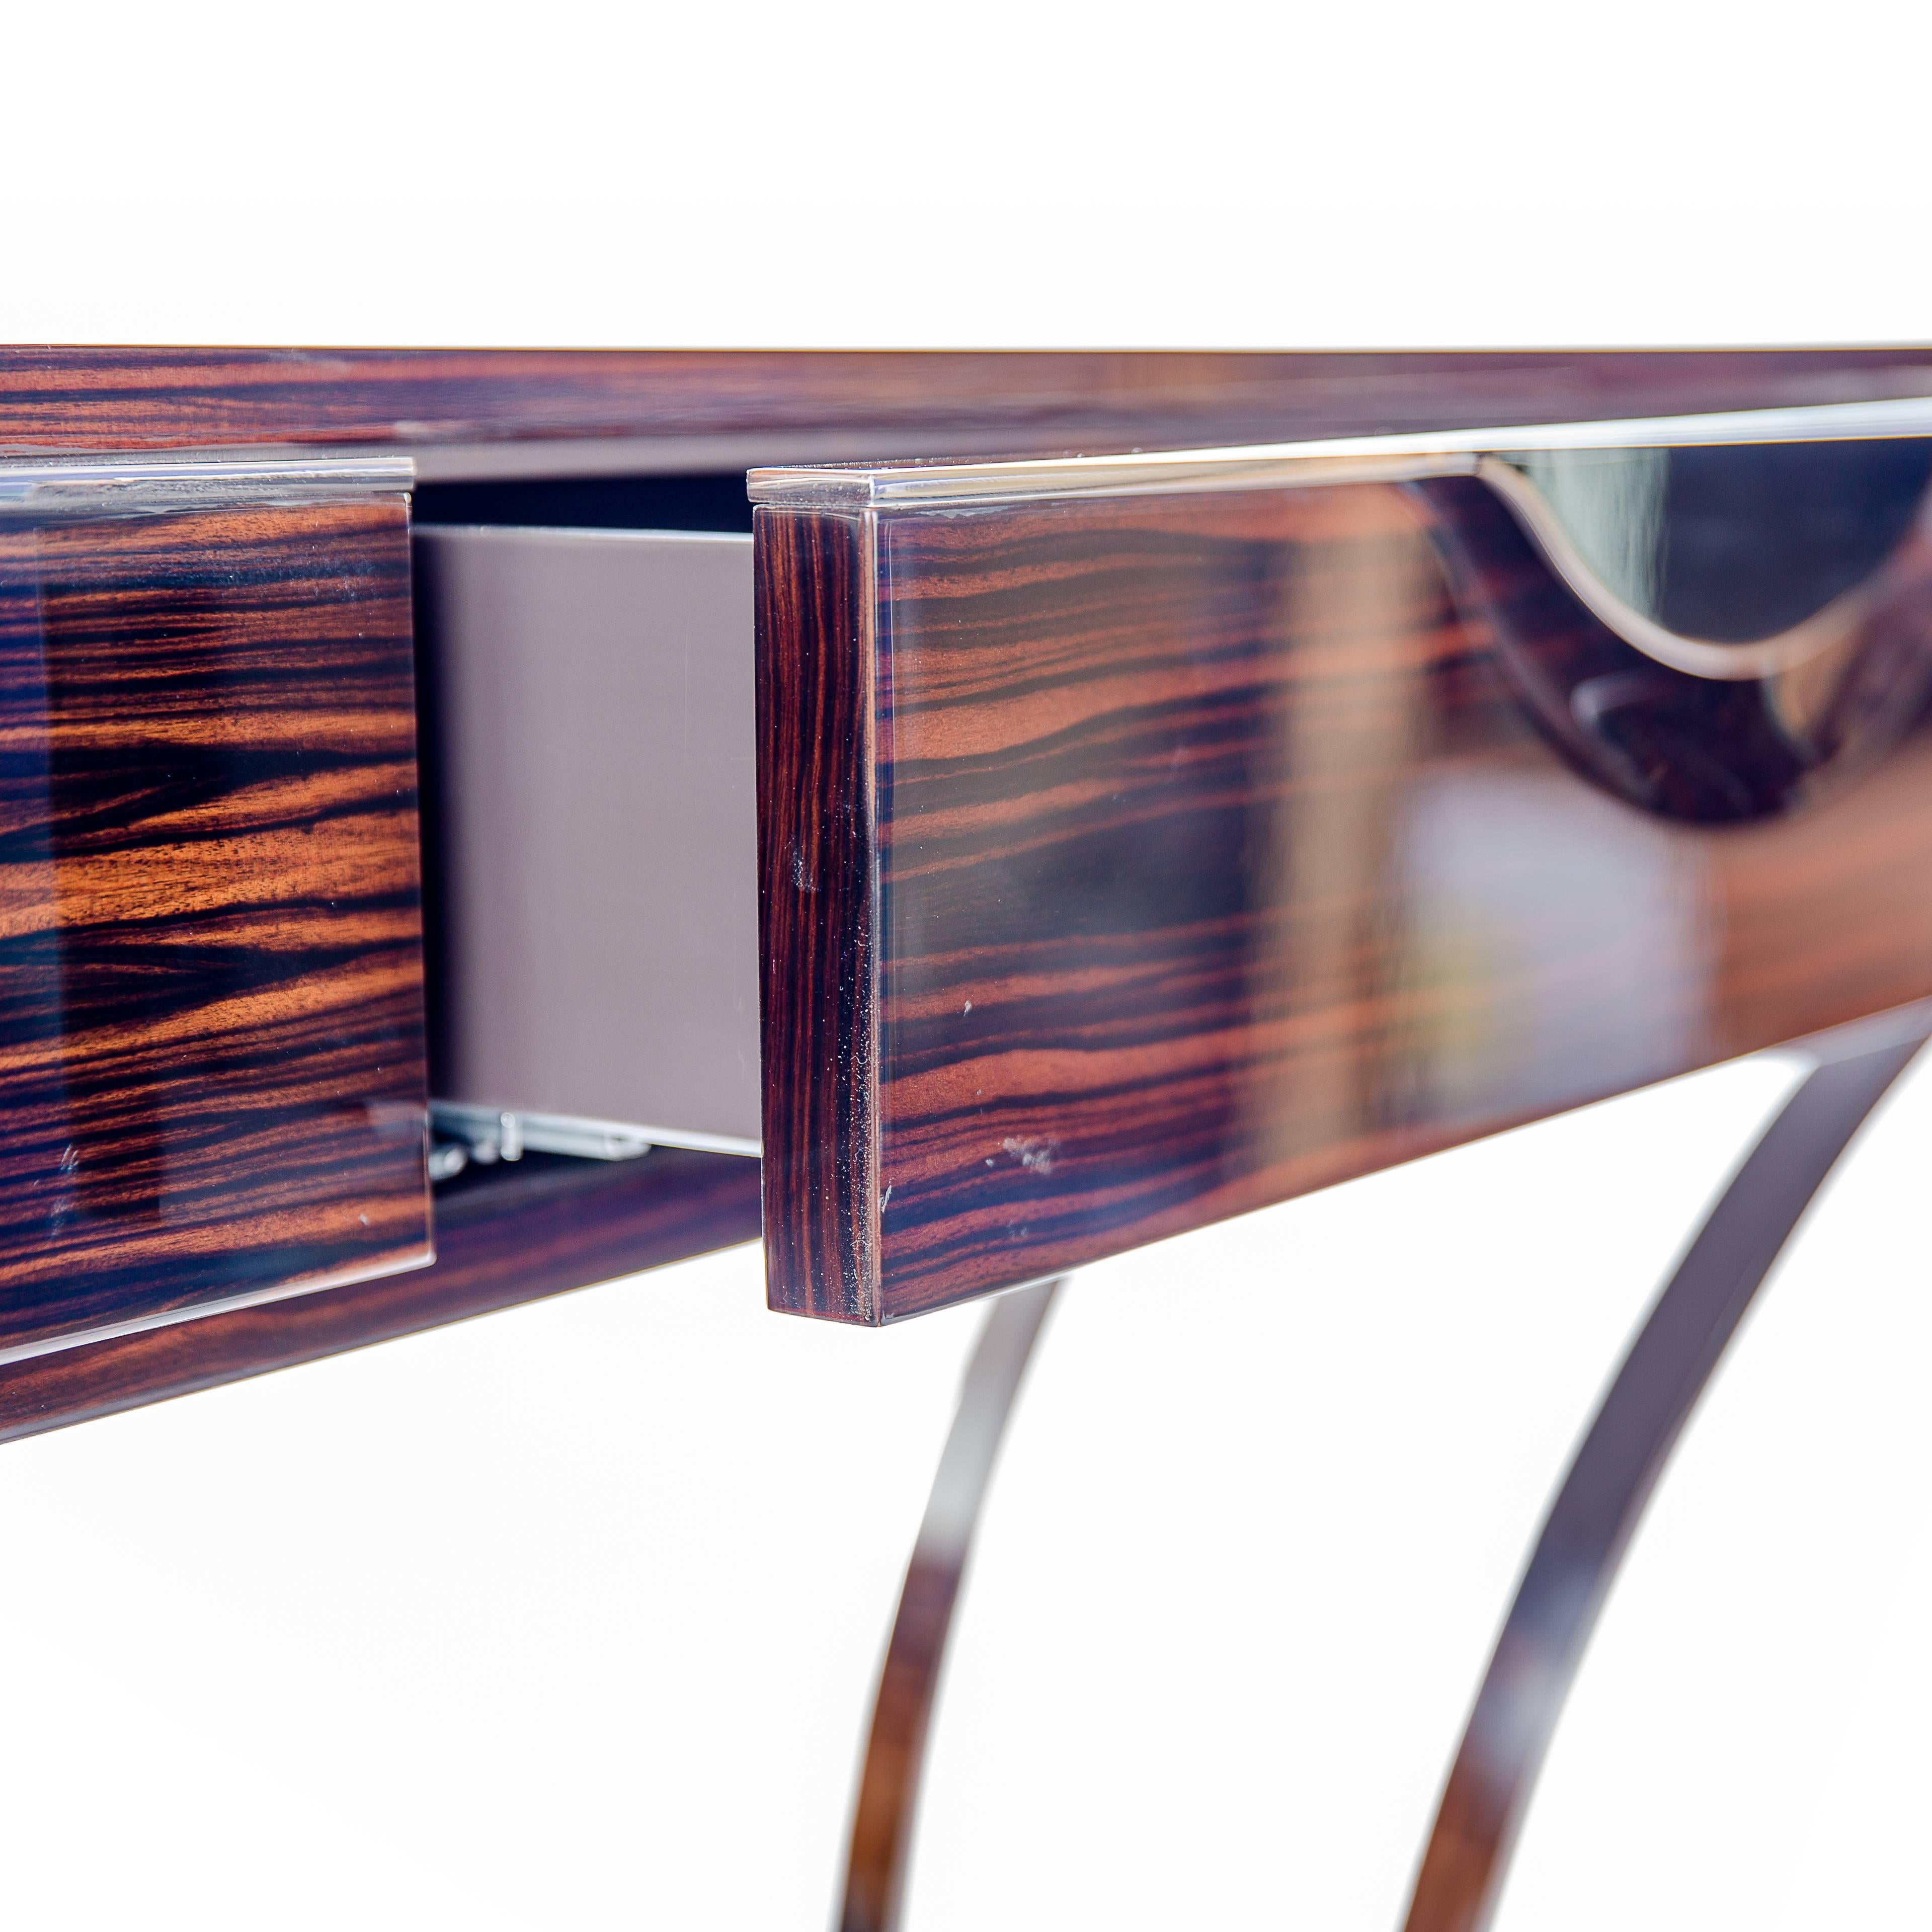 This is a stunning 'Royal' console table in a glossy ebony with chrome swooping legs. The entire front pulls out to be a drawer and slides back in with ease. Truly beautiful piece of furniture!